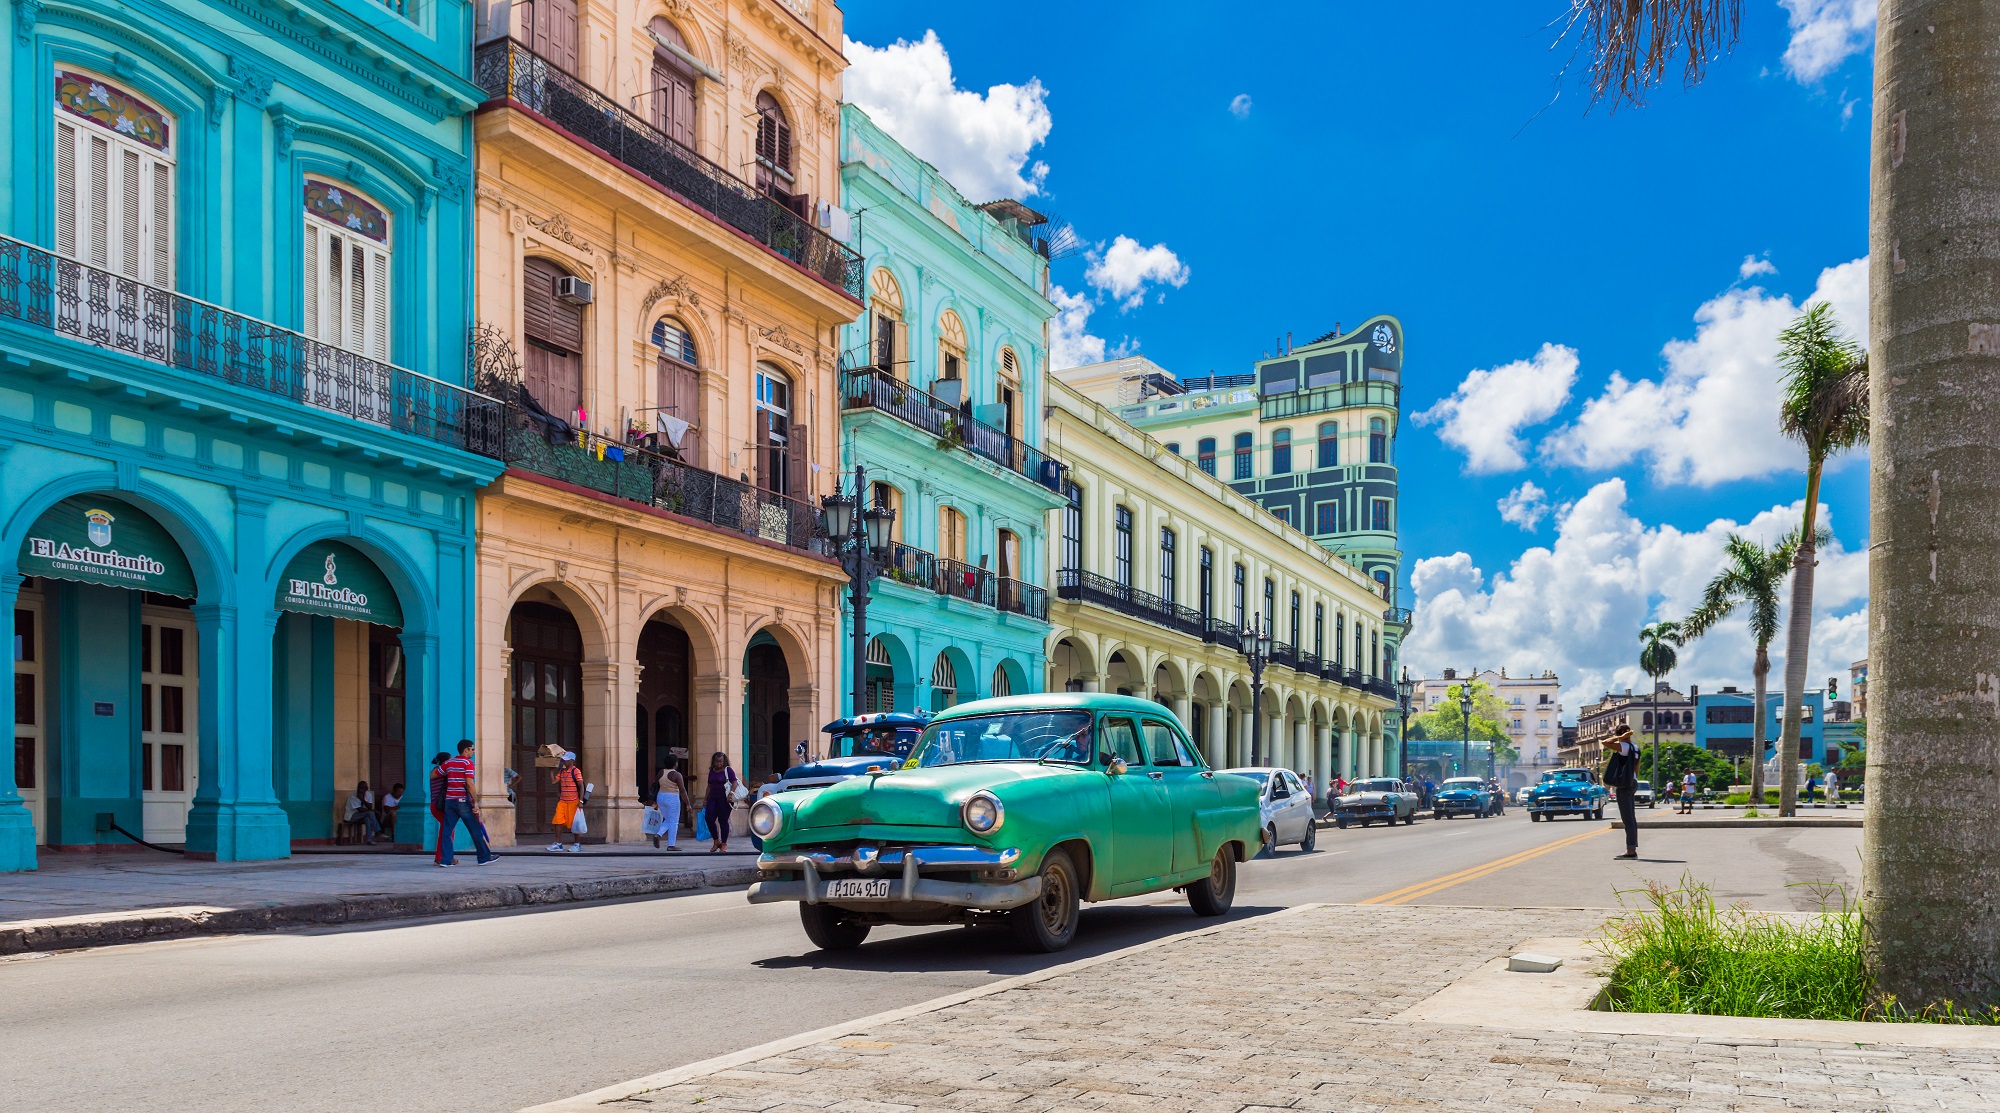 New agreement boosts tourism cooperation between China and Cuba